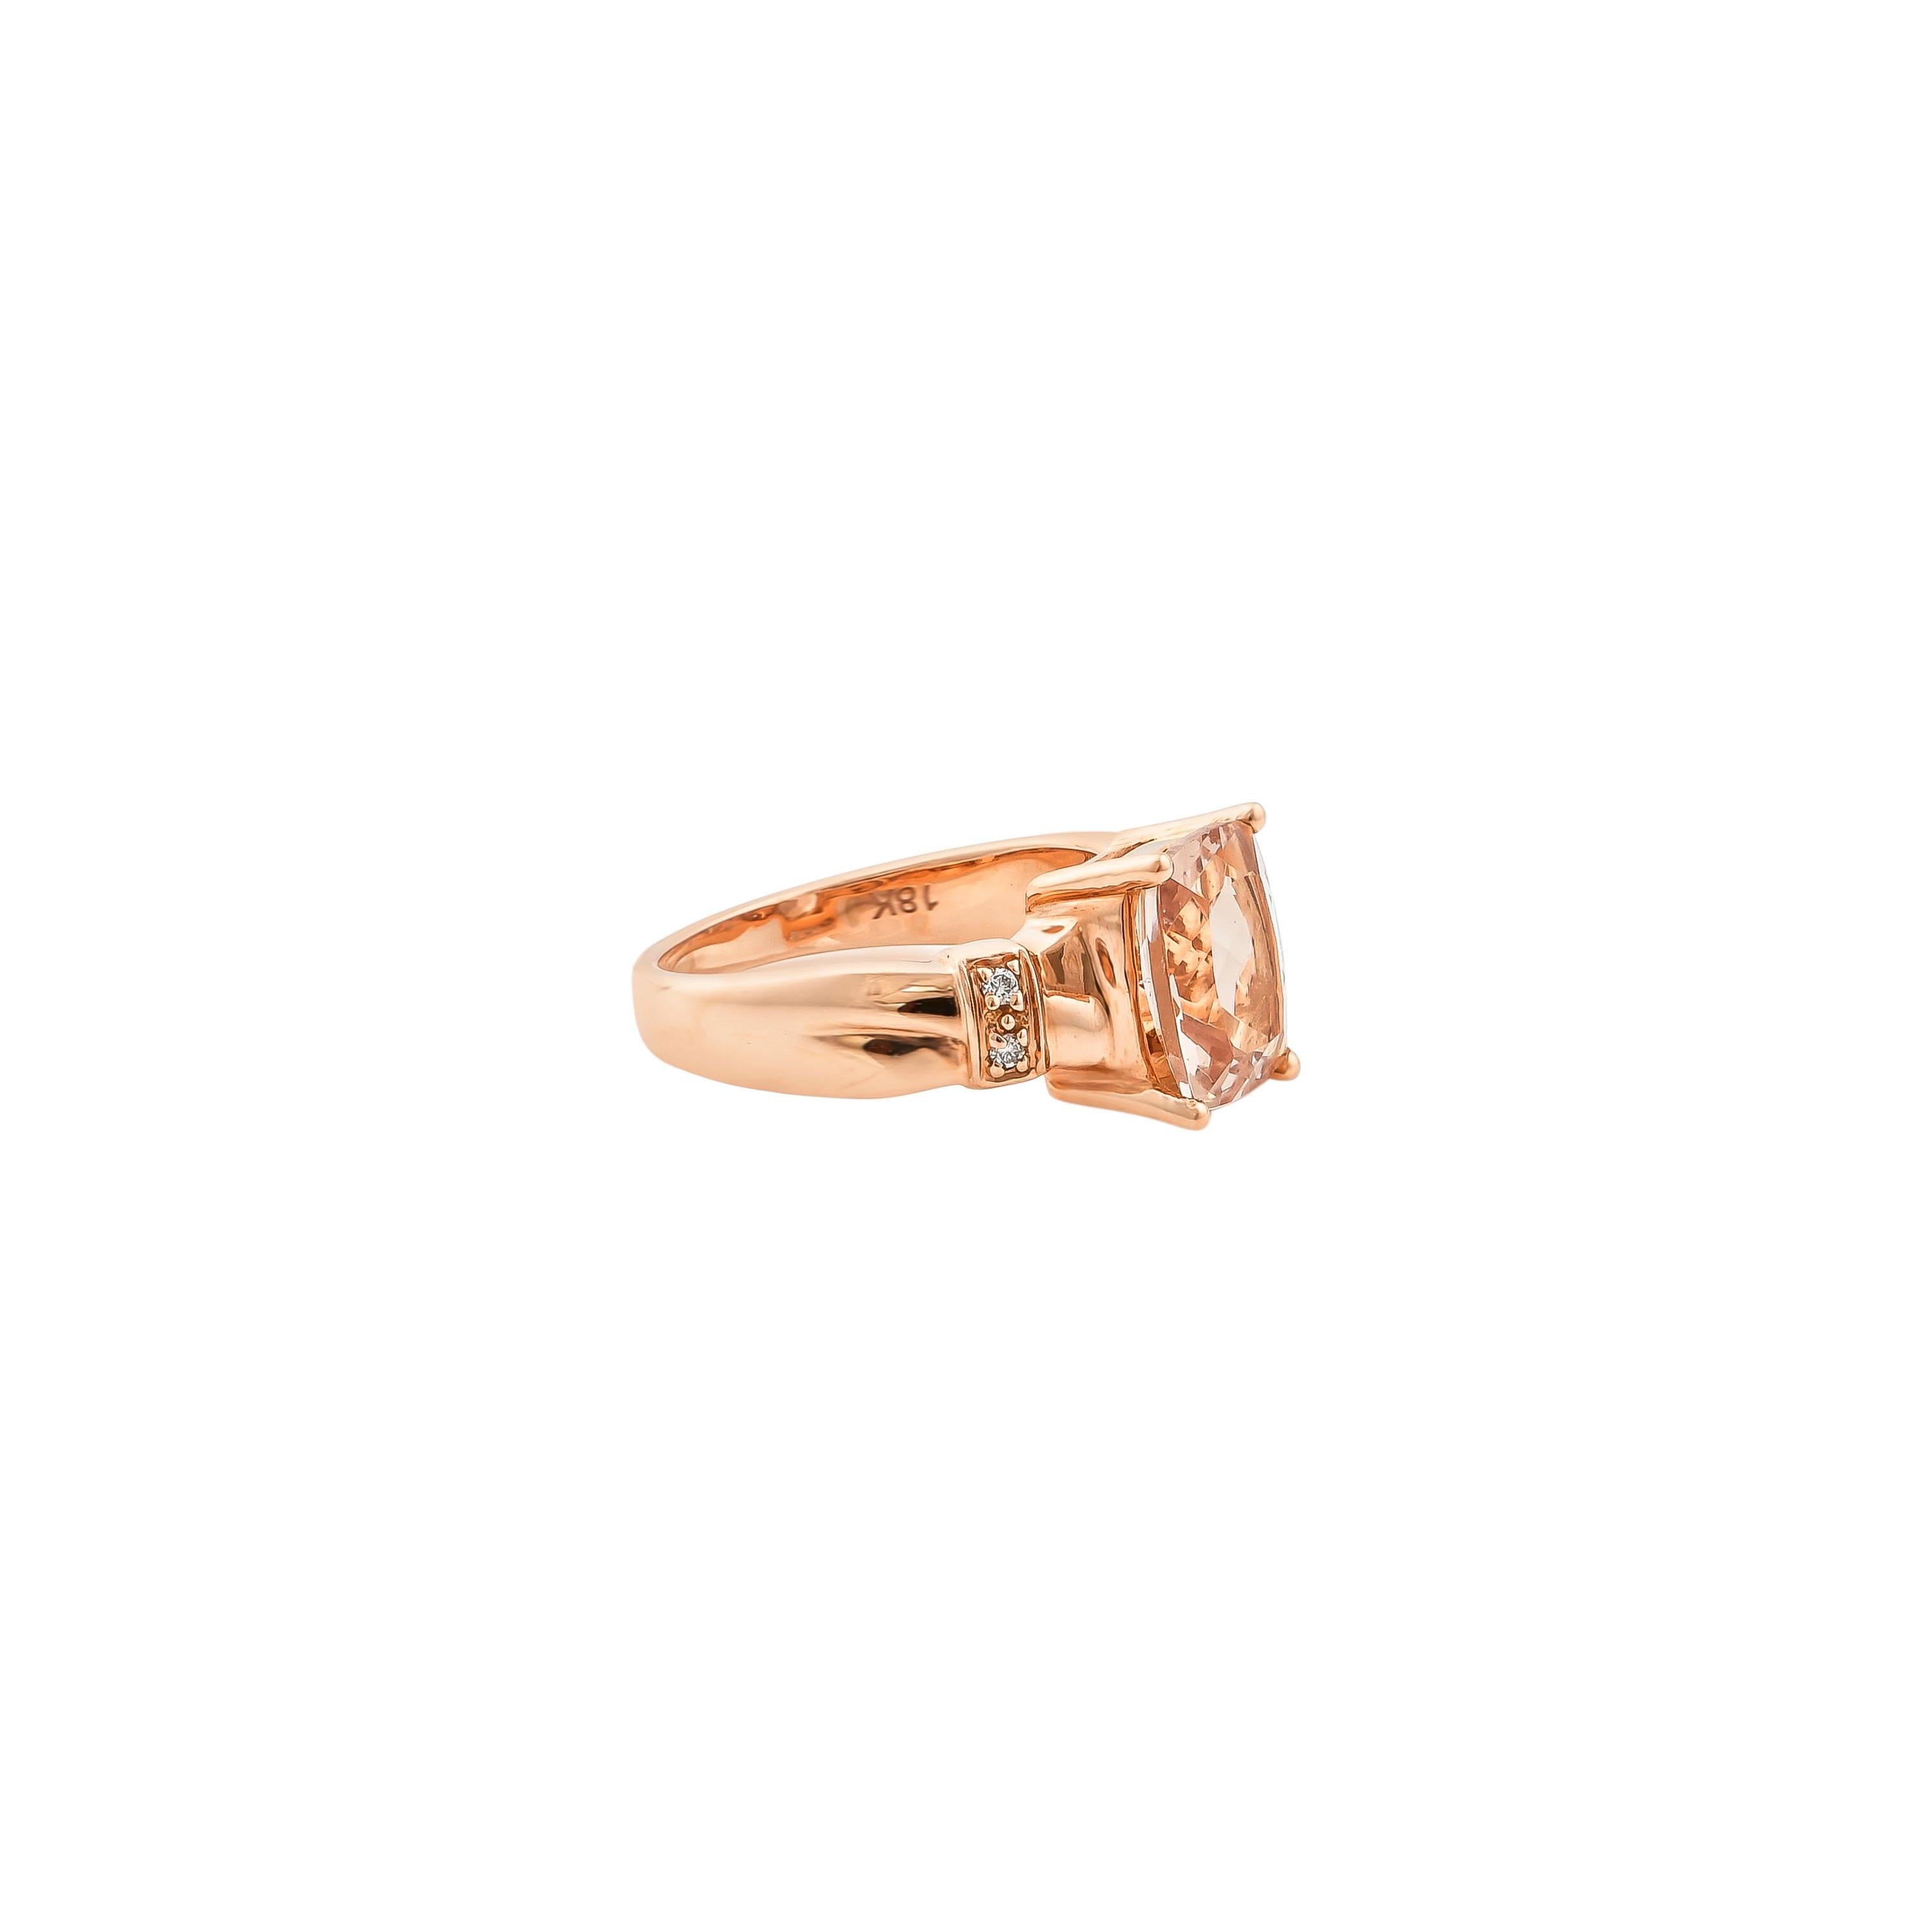 This collection features an array of magnificent morganites! Accented with diamonds these rings are made in rose gold and present a classic yet elegant look. 

Classic morganite ring in 18K rose gold with diamonds. 

Morganite: 2.49 carat cushion